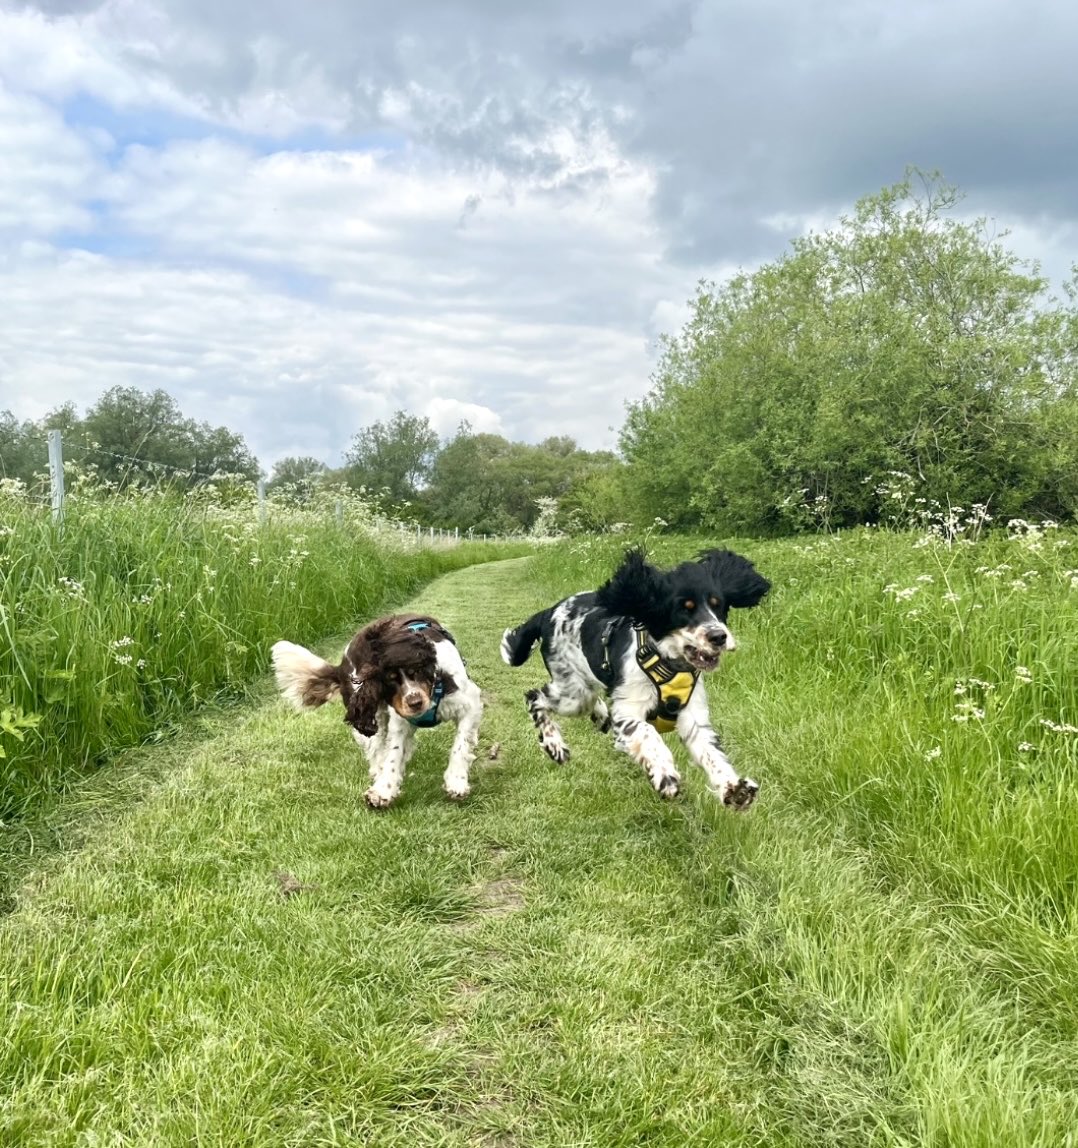 Spaniels in action! 😂